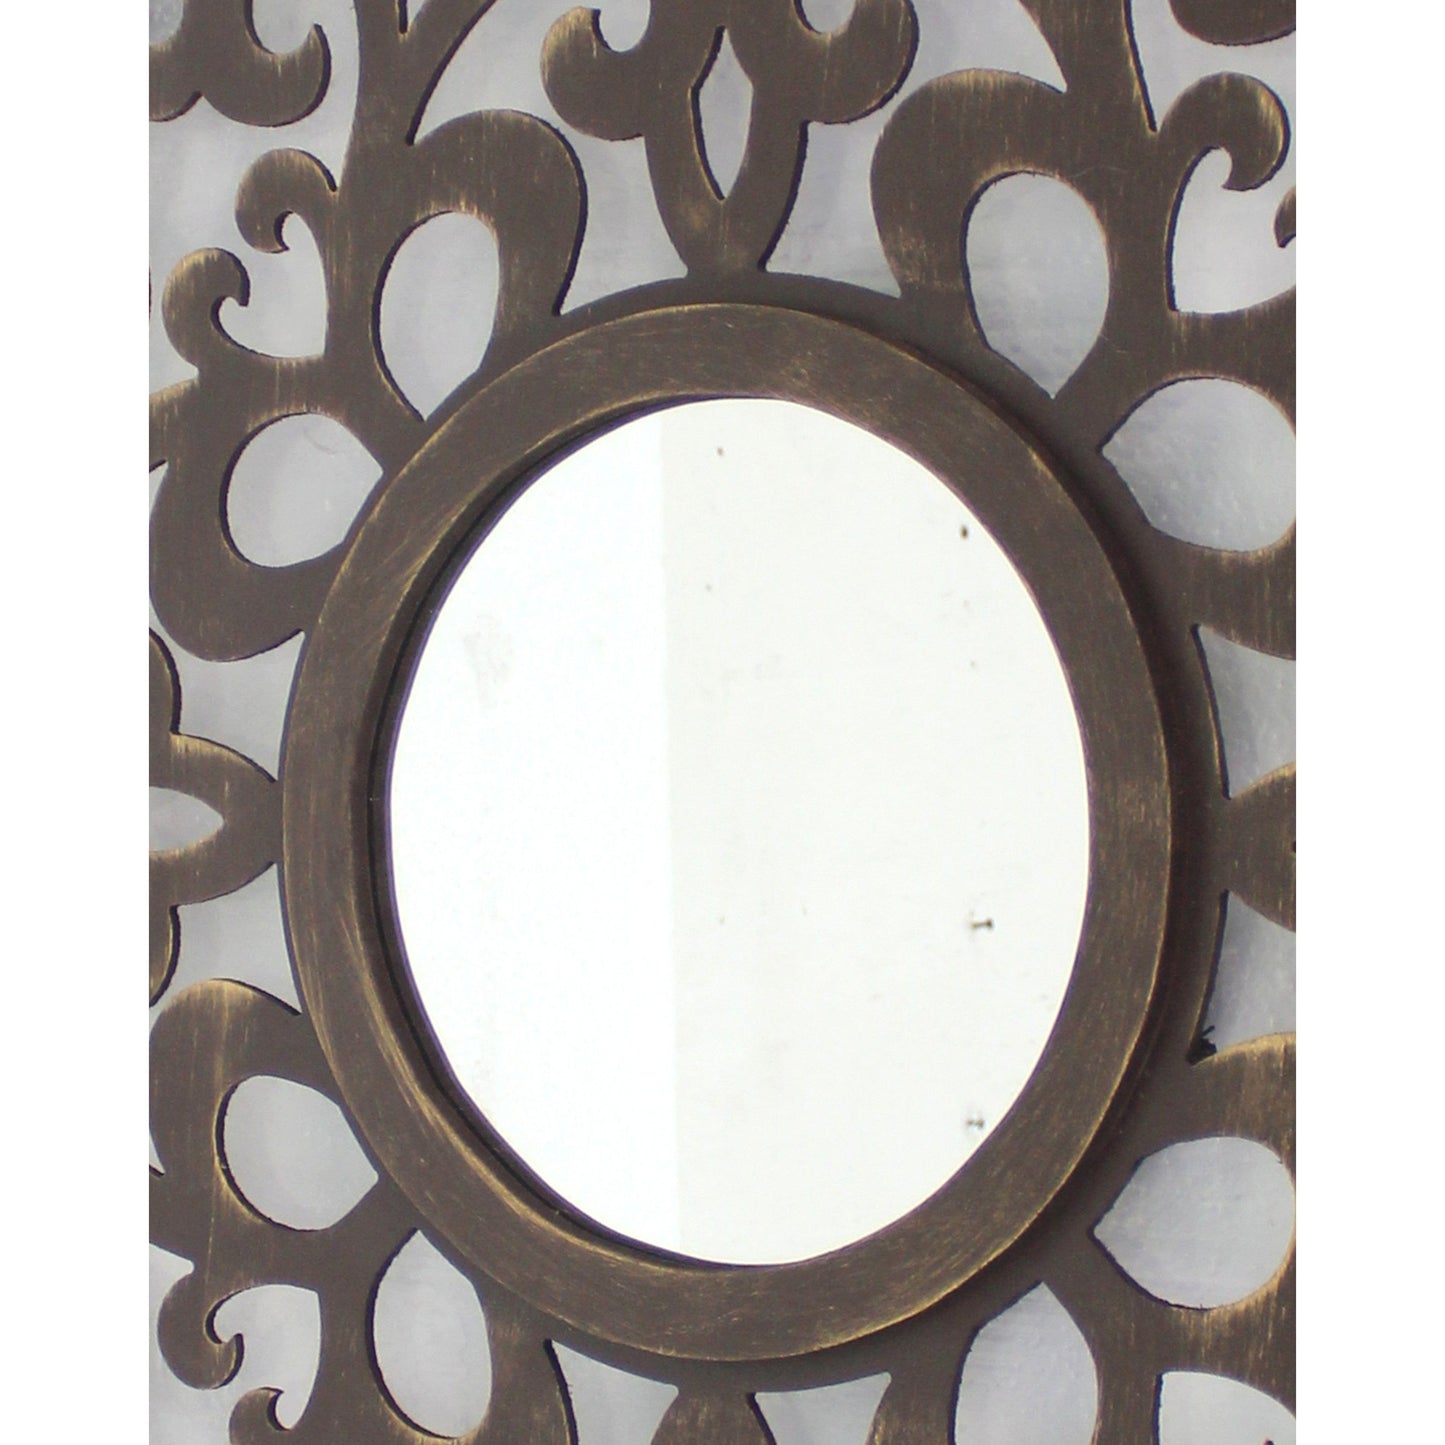 Benzara Espresso Wooden Frame Square Wall Mirror With Floral Cut Out Design